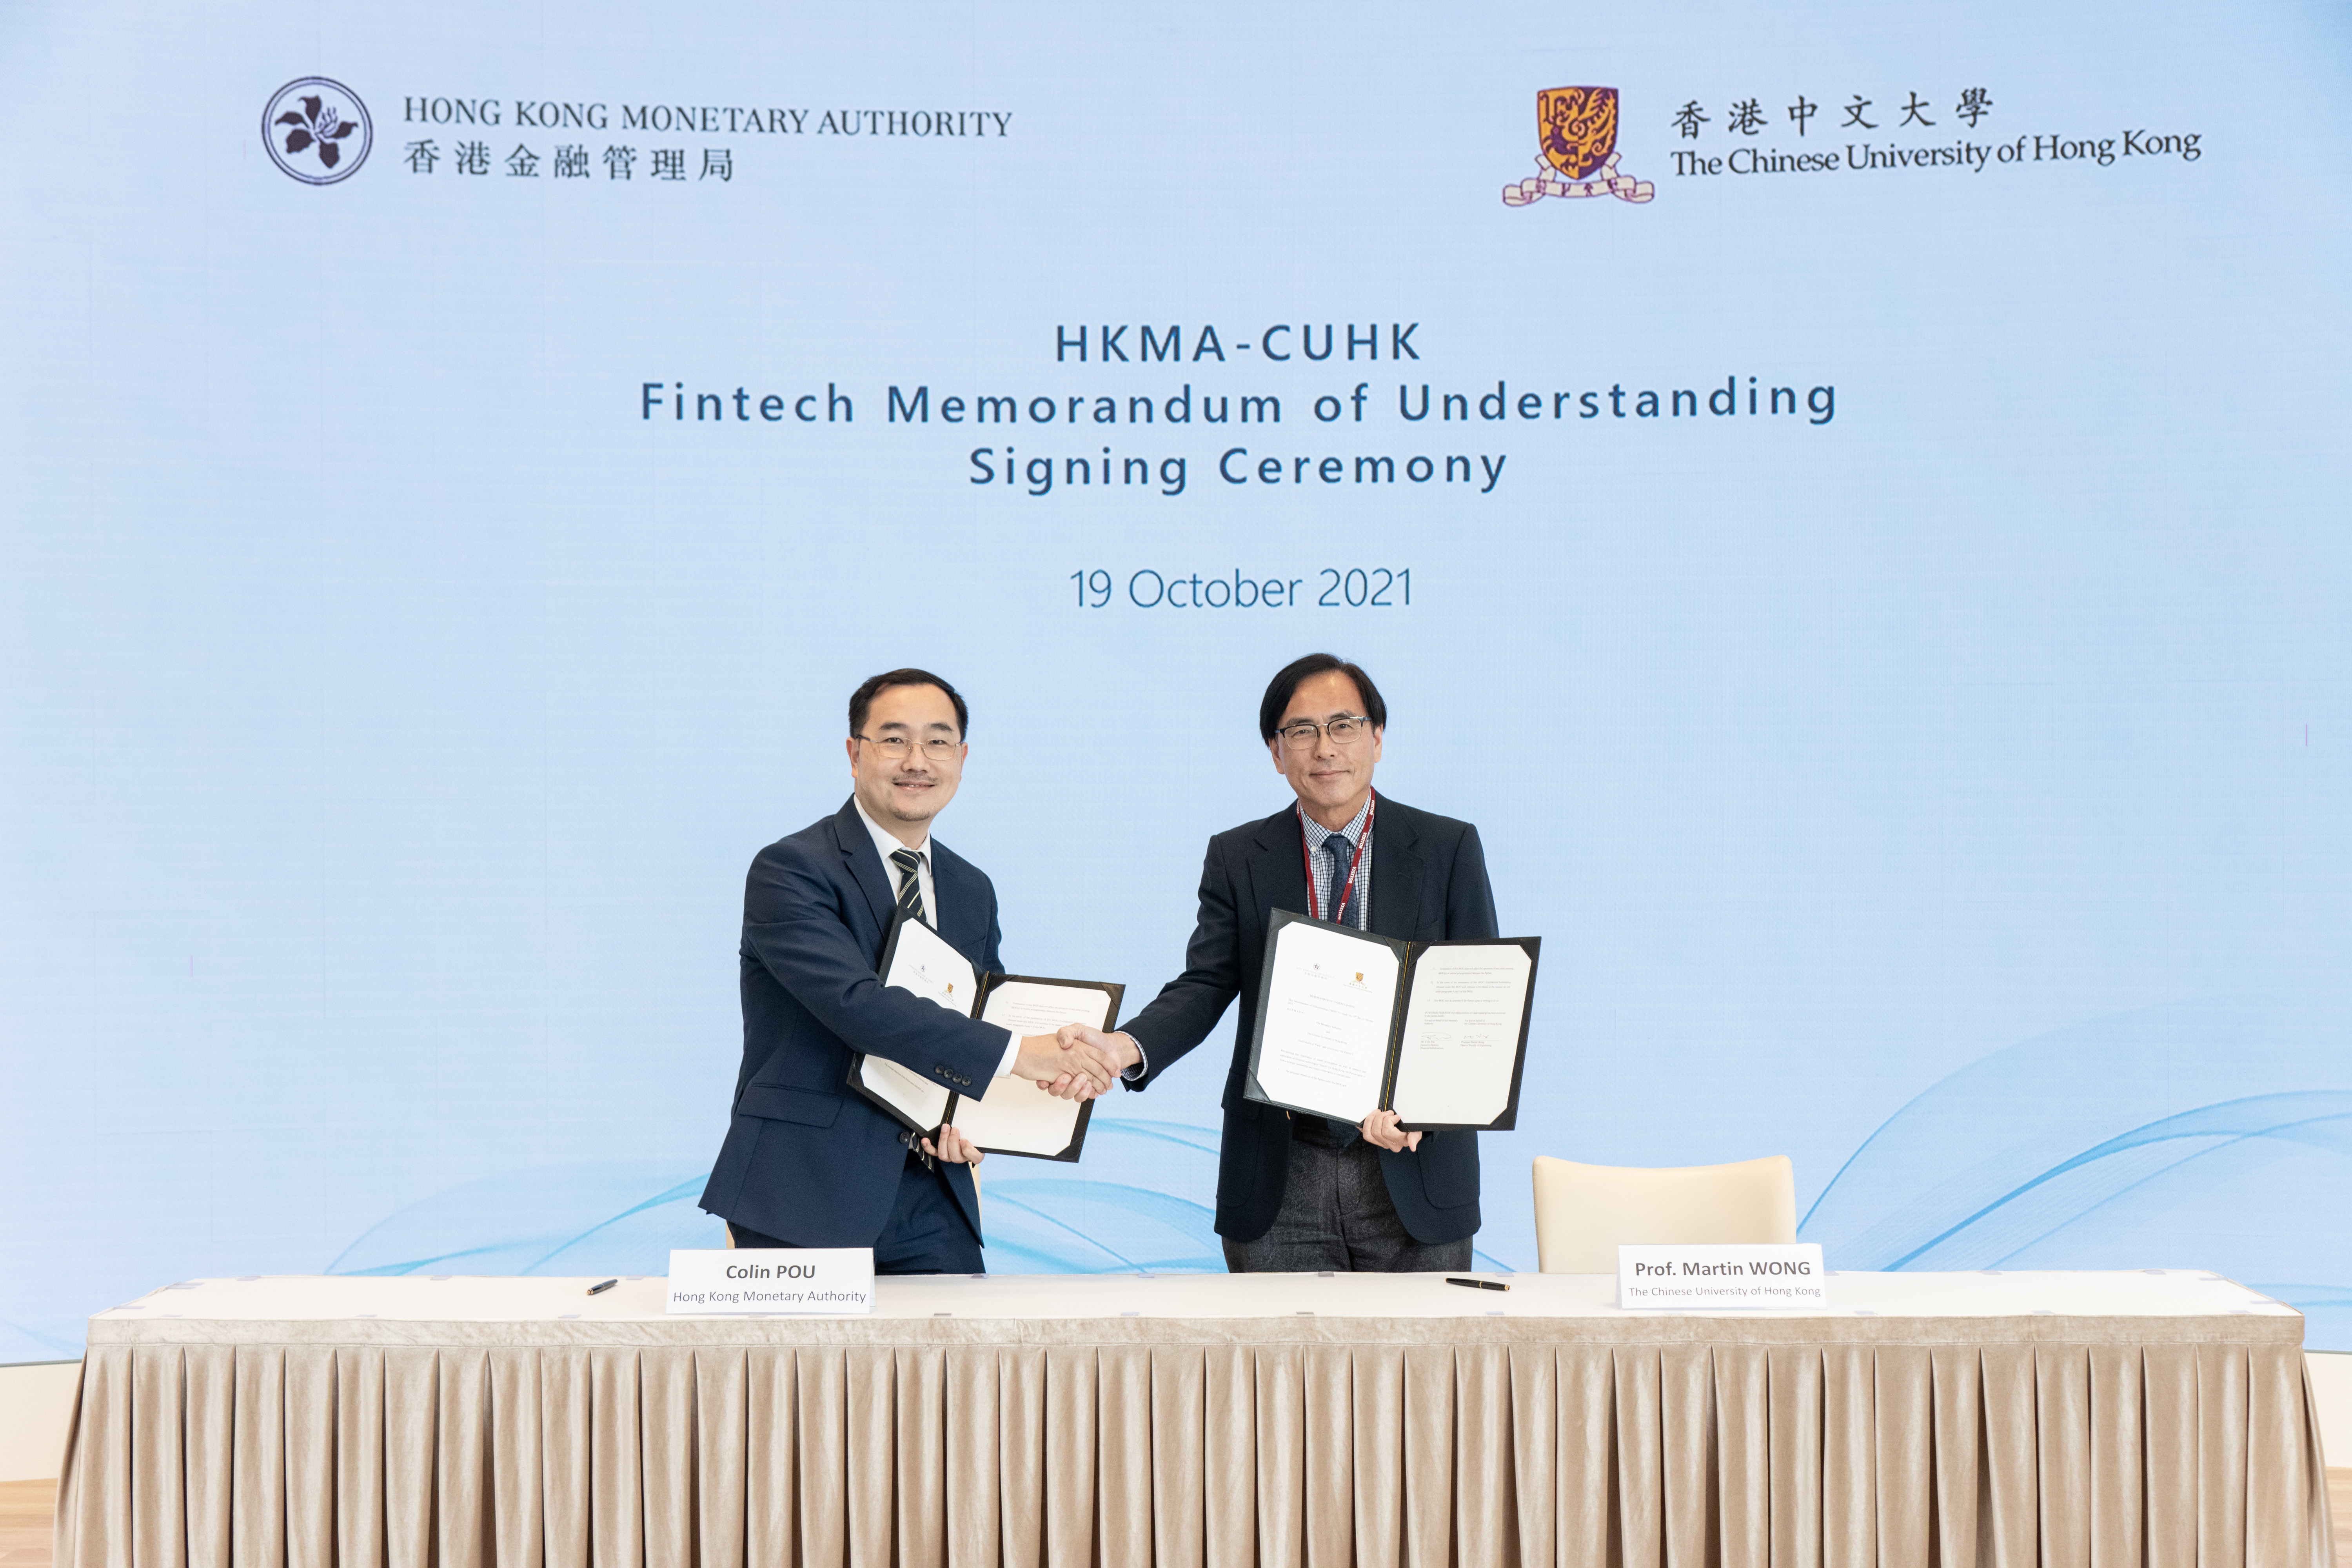 Professor Martin Wong, Dean of Engineering, the Chinese University of Hong Kong (CUHK), signed the MoU with Mr Colin Pou.